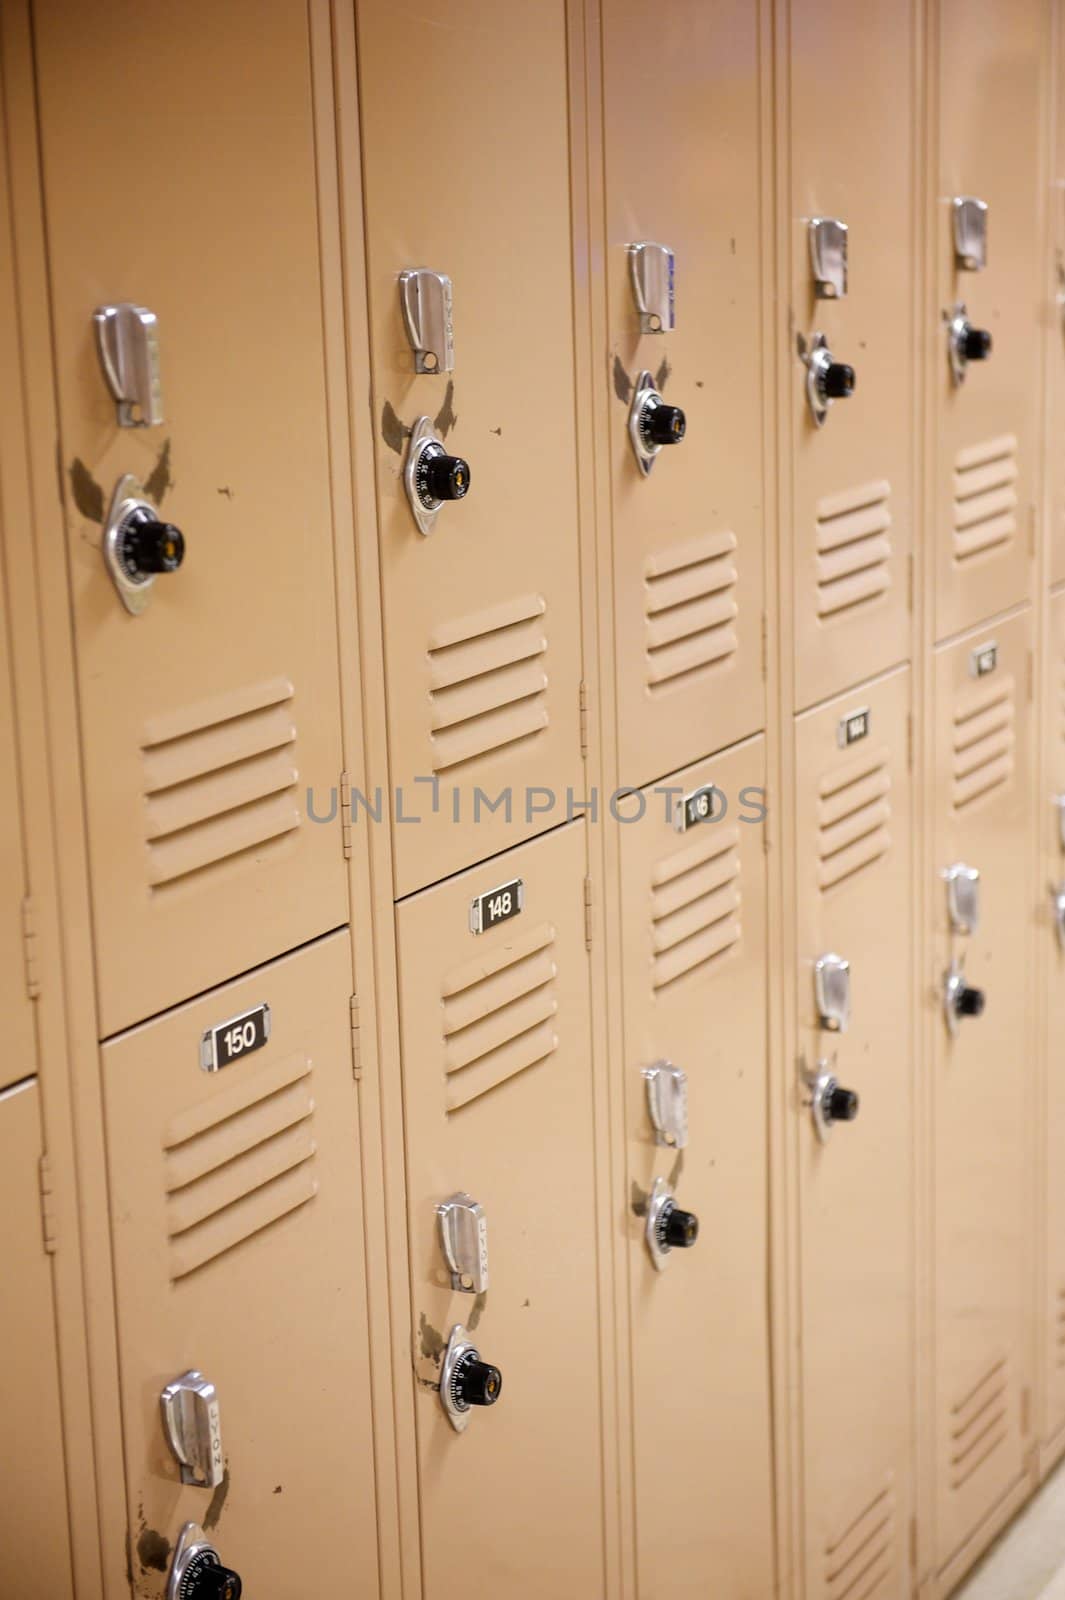 Two rows of classic metal school lockers at a private university